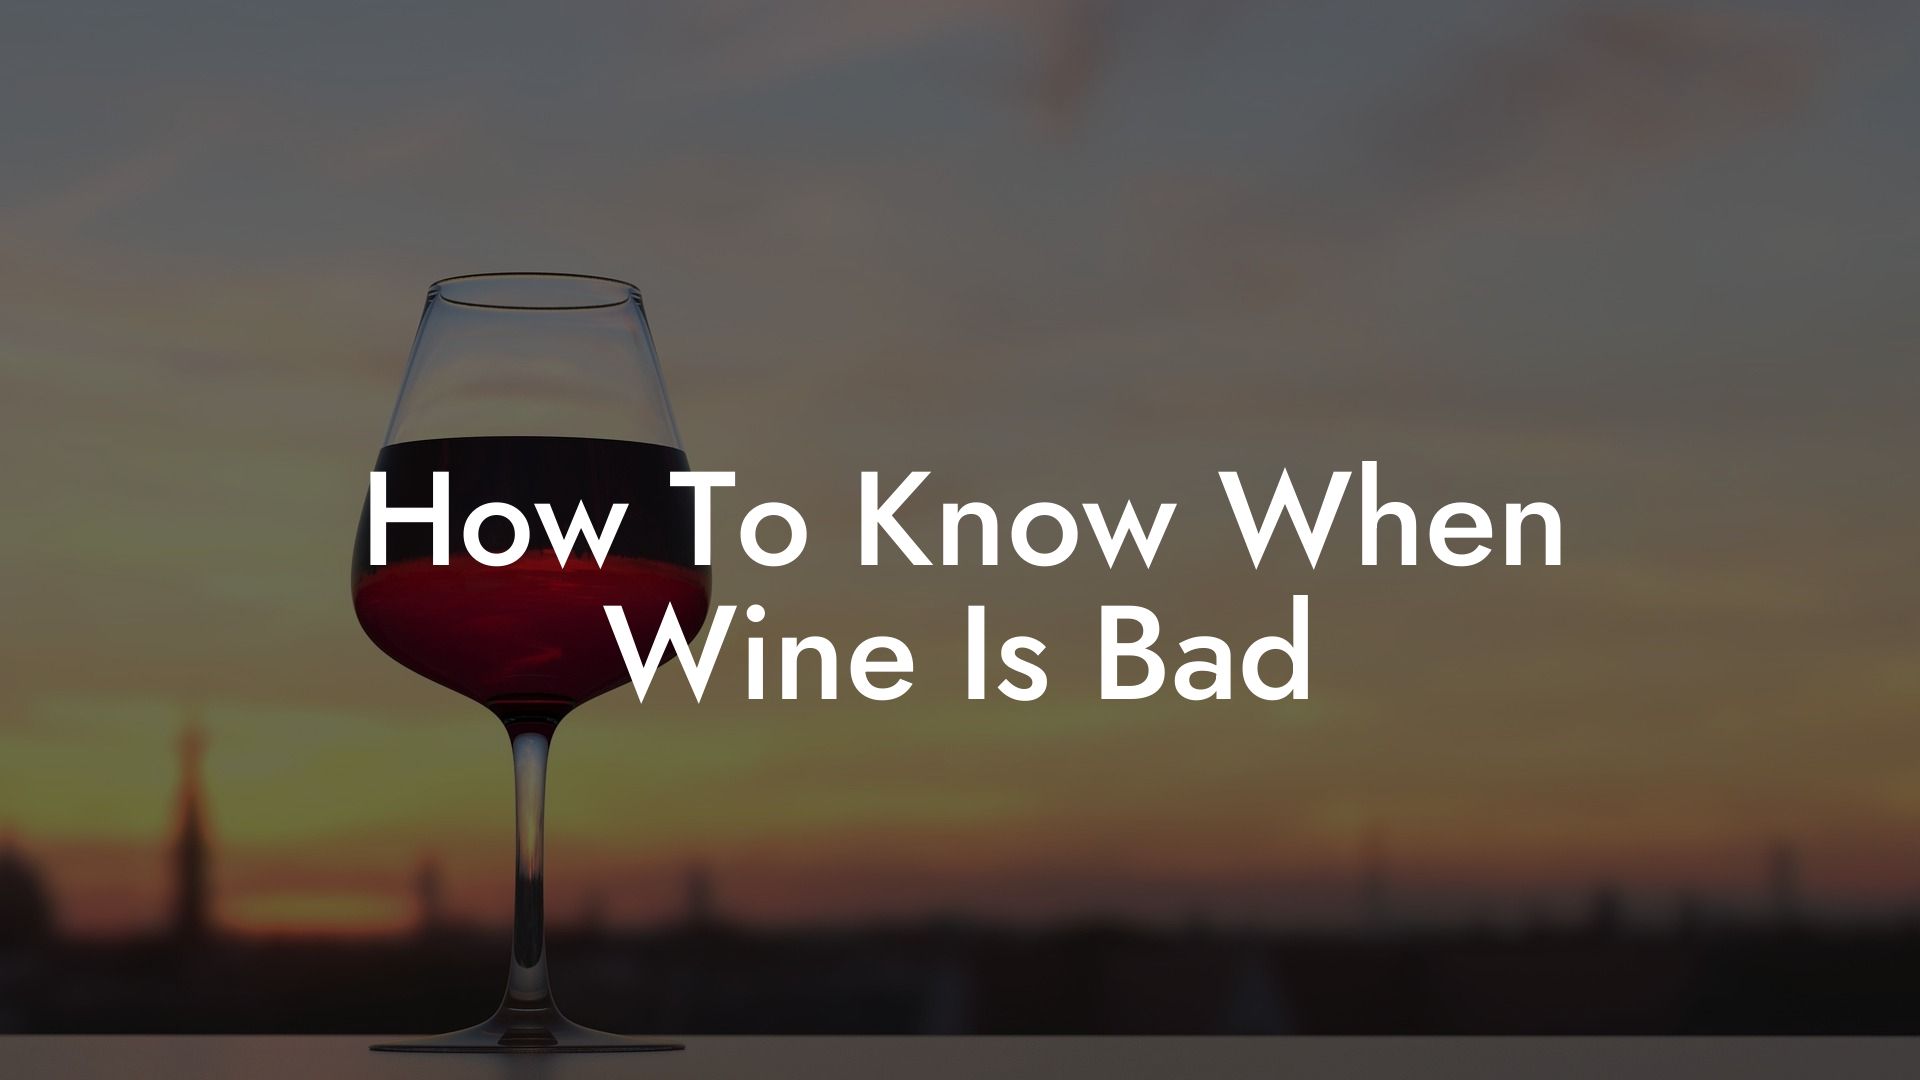 How To Know When Wine Is Bad